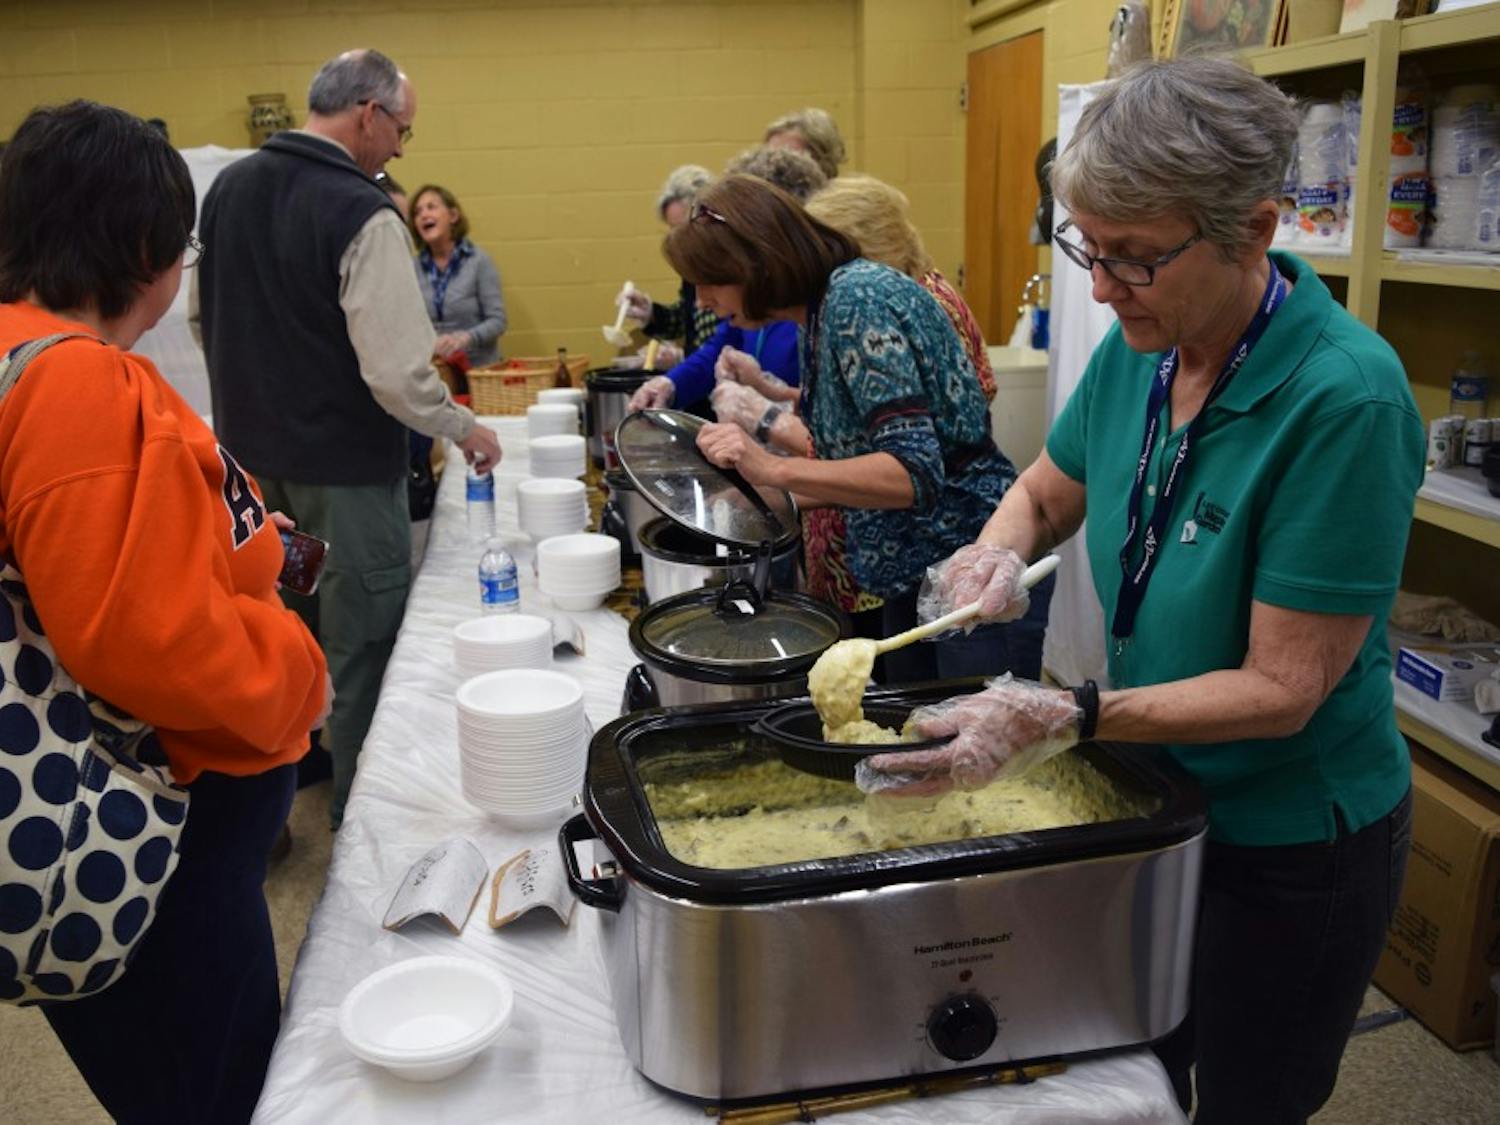 Customers are served soup.&nbsp;3rd Annual Empty Bowls event on Saturday, February 13 from 10 a.m. – 2 p.m.at the Denson Drive Recreation Studio in Opelika.